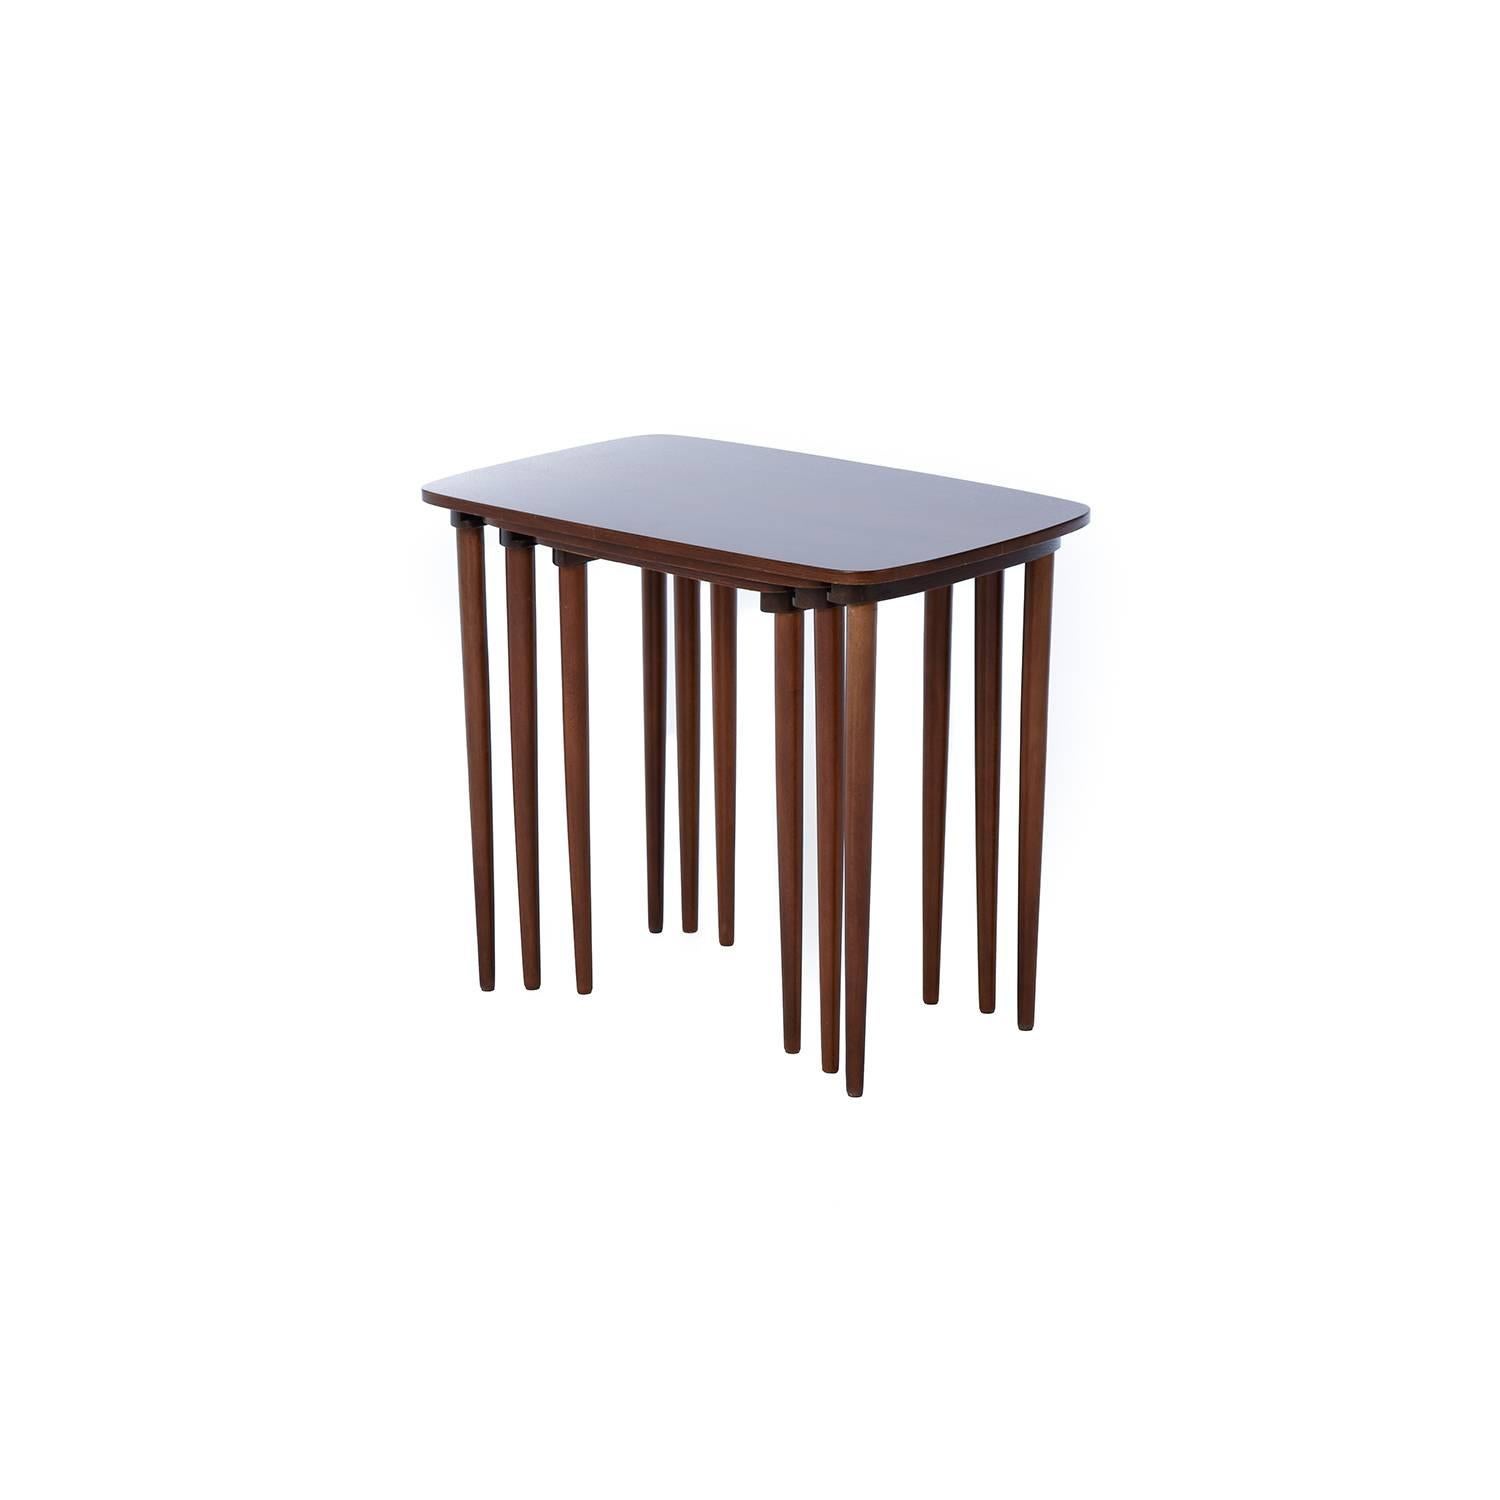 Matchstick legs give these mahogany nesting tables a slender appearance. These are original tables from 1940s, Denmark. Lines are traditional with a modernist flare. When stacked the interior tables legs float just above the ground.